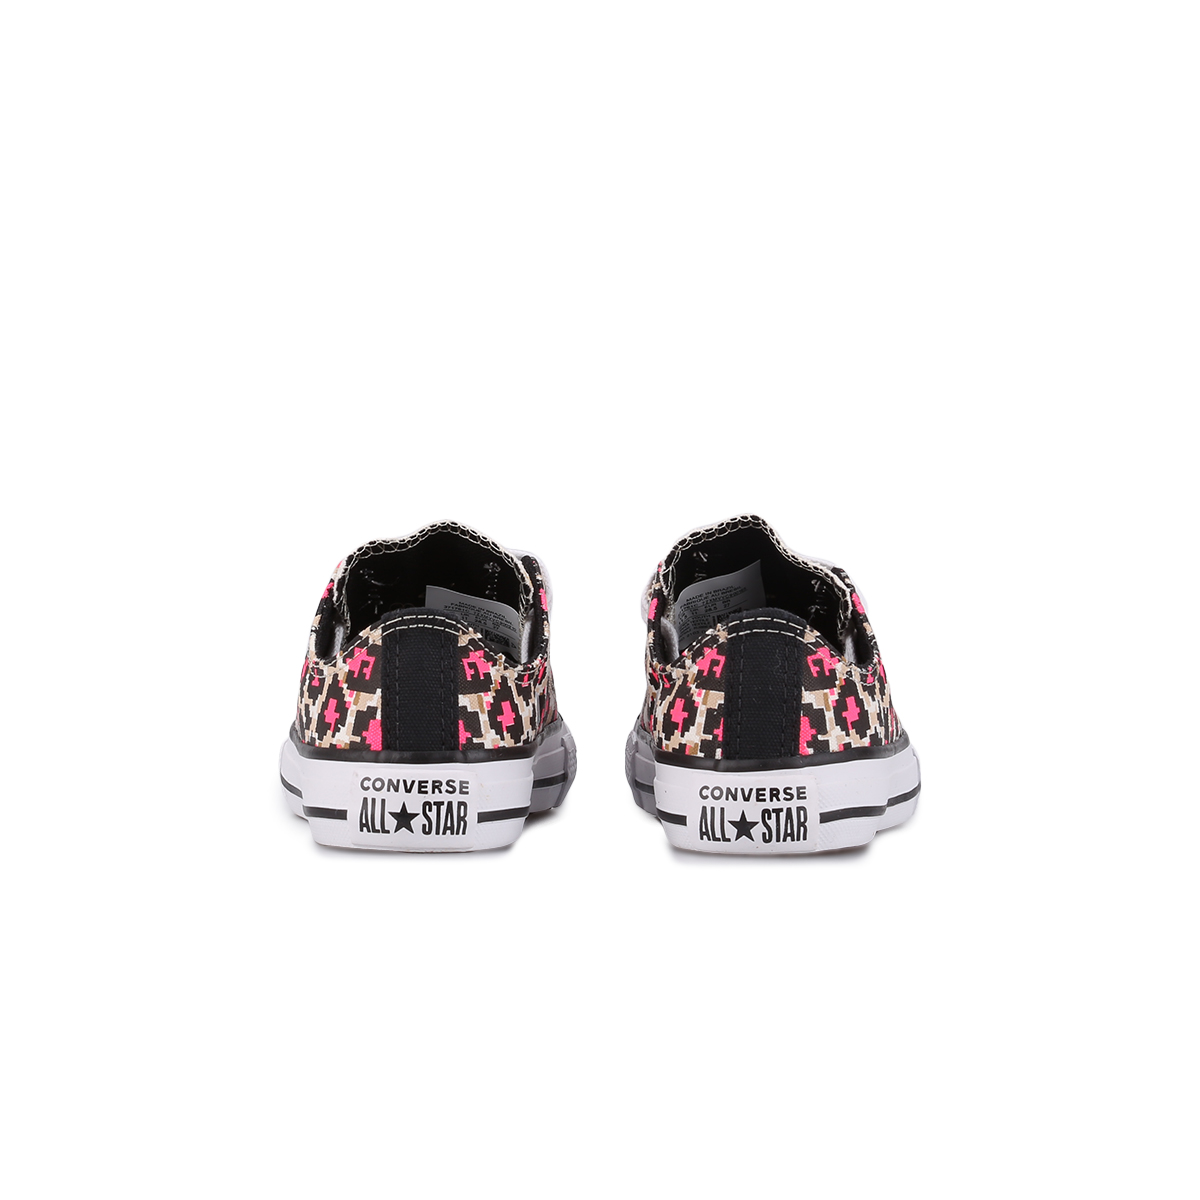 Zapatillas Converse Chuck Taylor All Star Ox,  image number null